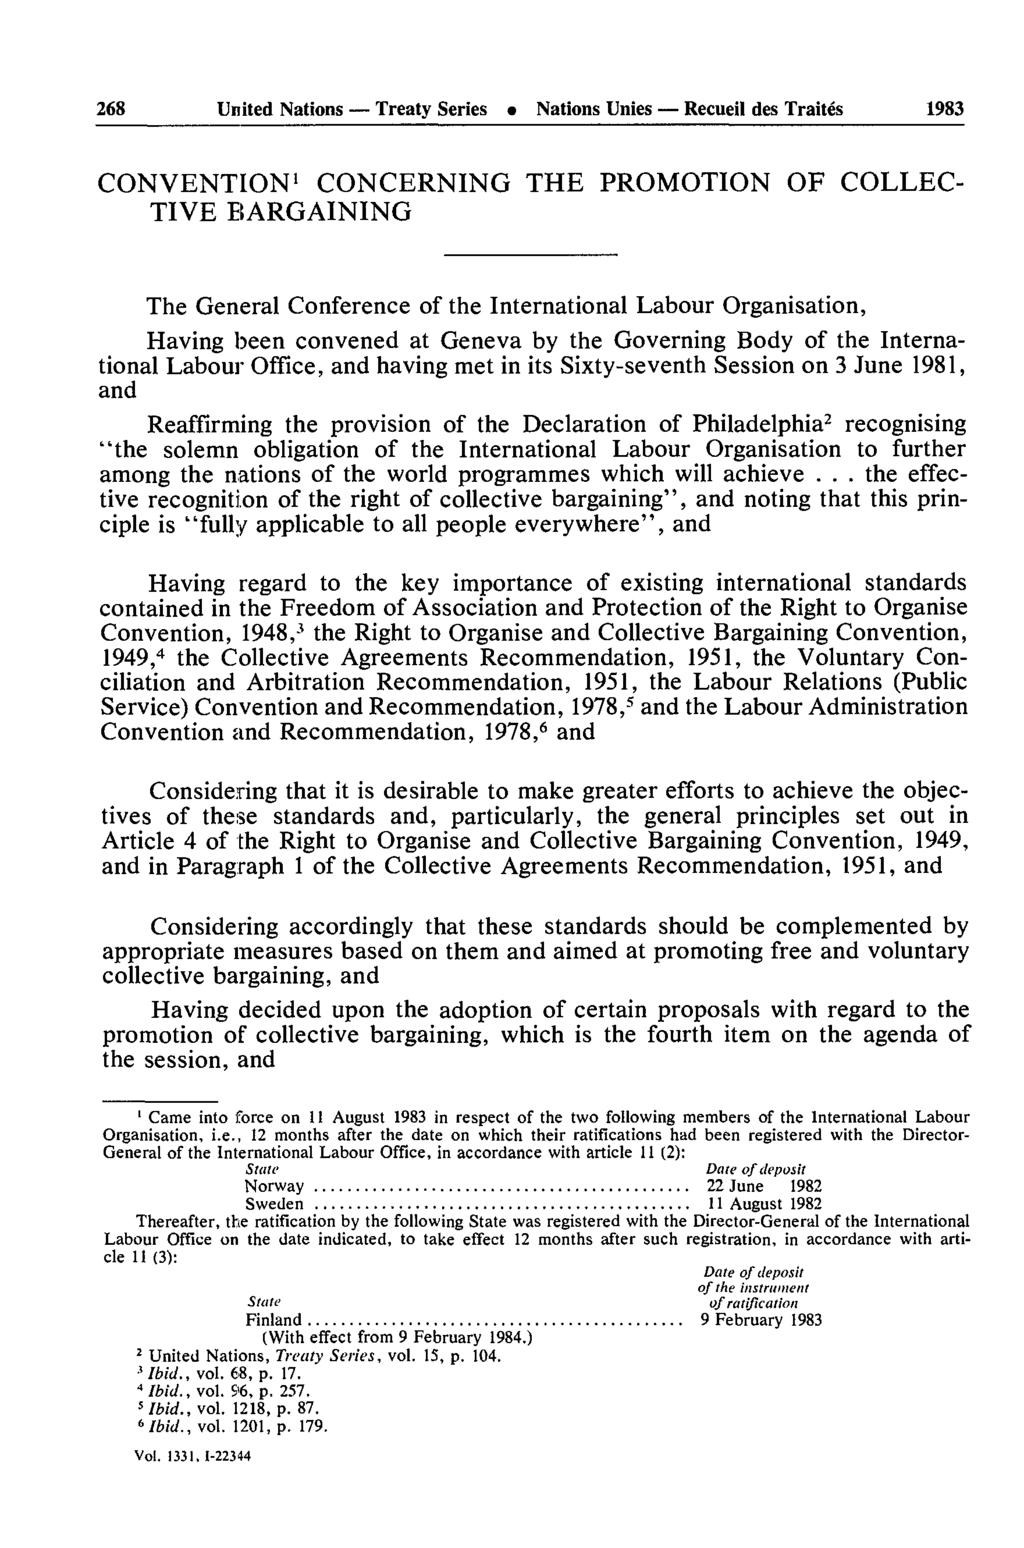 268 United Nations Treaty Series Nations Unies Recueil des Traités 1983 CONVENTION 1 CONCERNING THE PROMOTION OF COLLEC TIVE BARGAINING The General Conference of the International Labour